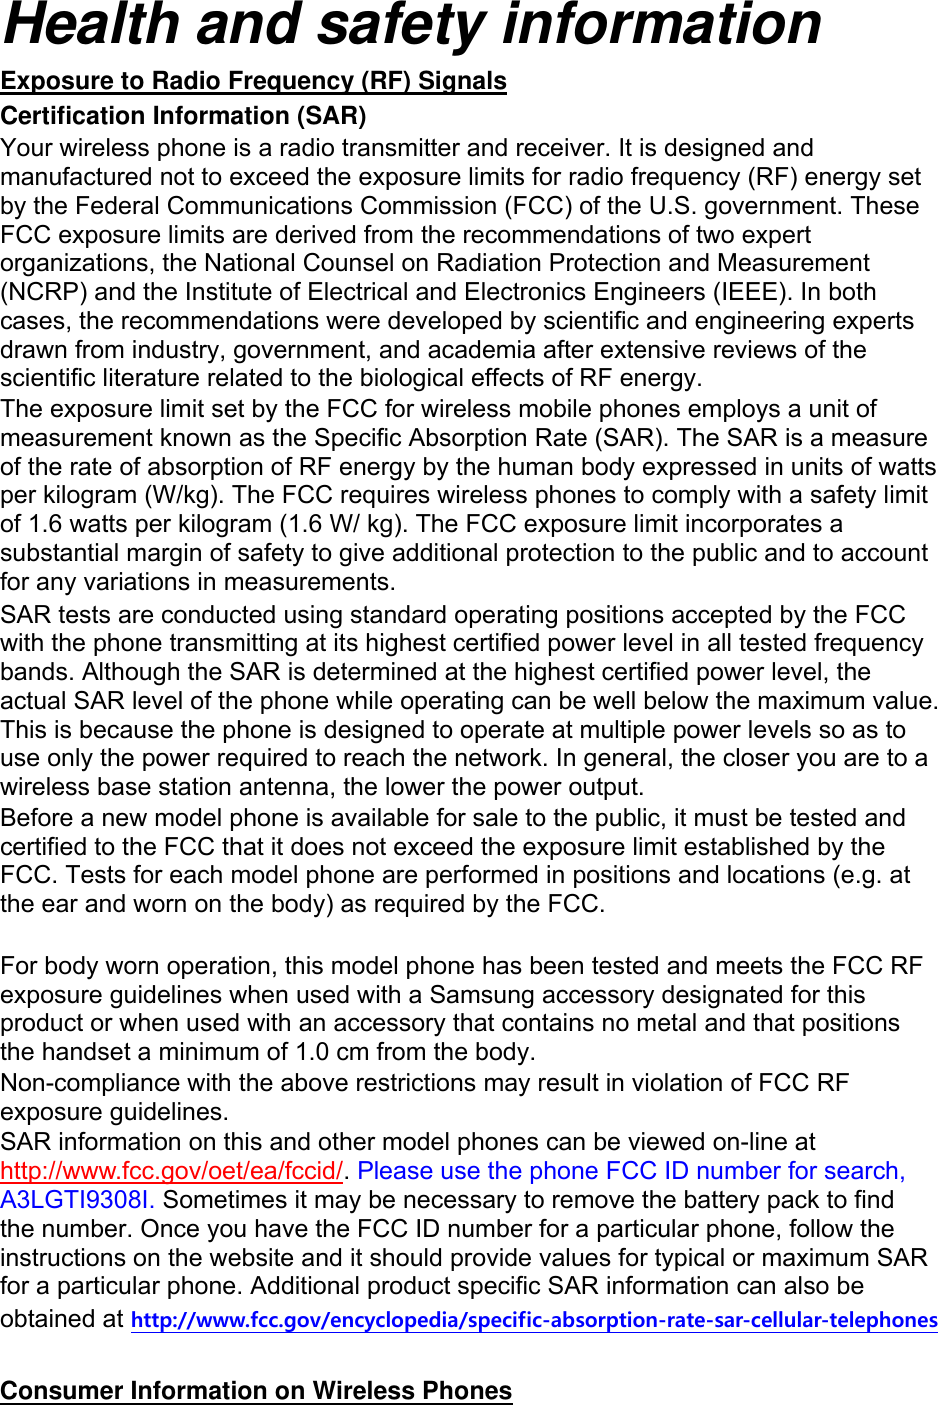 Health and safety information Exposure to Radio Frequency (RF) Signals Certification Information (SAR) Your wireless phone is a radio transmitter and receiver. It is designed and manufactured not to exceed the exposure limits for radio frequency (RF) energy set by the Federal Communications Commission (FCC) of the U.S. government. These FCC exposure limits are derived from the recommendations of two expert organizations, the National Counsel on Radiation Protection and Measurement (NCRP) and the Institute of Electrical and Electronics Engineers (IEEE). In both cases, the recommendations were developed by scientific and engineering experts drawn from industry, government, and academia after extensive reviews of the scientific literature related to the biological effects of RF energy. The exposure limit set by the FCC for wireless mobile phones employs a unit of measurement known as the Specific Absorption Rate (SAR). The SAR is a measure of the rate of absorption of RF energy by the human body expressed in units of watts per kilogram (W/kg). The FCC requires wireless phones to comply with a safety limit of 1.6 watts per kilogram (1.6 W/ kg). The FCC exposure limit incorporates a substantial margin of safety to give additional protection to the public and to account for any variations in measurements. SAR tests are conducted using standard operating positions accepted by the FCC with the phone transmitting at its highest certified power level in all tested frequency bands. Although the SAR is determined at the highest certified power level, the actual SAR level of the phone while operating can be well below the maximum value. This is because the phone is designed to operate at multiple power levels so as to use only the power required to reach the network. In general, the closer you are to a wireless base station antenna, the lower the power output. Before a new model phone is available for sale to the public, it must be tested and certified to the FCC that it does not exceed the exposure limit established by the FCC. Tests for each model phone are performed in positions and locations (e.g. at the ear and worn on the body) as required by the FCC.      For body worn operation, this model phone has been tested and meets the FCC RF exposure guidelines when used with a Samsung accessory designated for this product or when used with an accessory that contains no metal and that positions the handset a minimum of 1.0 cm from the body.   Non-compliance with the above restrictions may result in violation of FCC RF exposure guidelines. SAR information on this and other model phones can be viewed on-line at http://www.fcc.gov/oet/ea/fccid/. Please use the phone FCC ID number for search, A3LGTI9308I. Sometimes it may be necessary to remove the battery pack to find the number. Once you have the FCC ID number for a particular phone, follow the instructions on the website and it should provide values for typical or maximum SAR for a particular phone. Additional product specific SAR information can also be obtained at http://www.fcc.gov/encyclopedia/specific-absorption-rate-sar-cellular-telephones  Consumer Information on Wireless Phones 